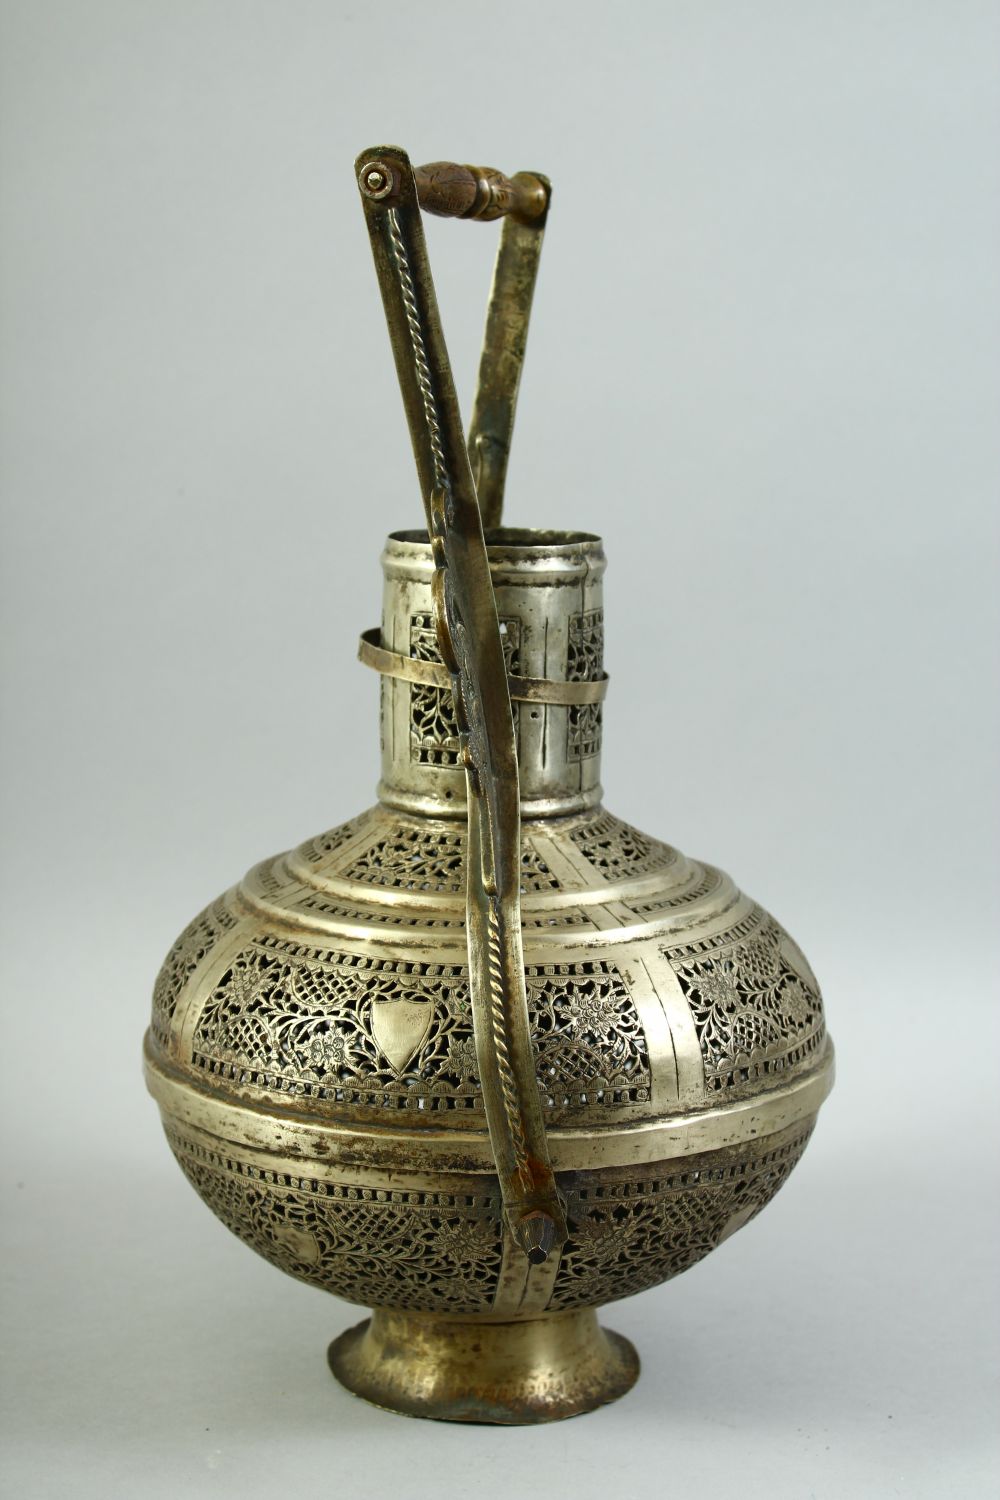 AN ISLAMIC OPENWORK METAL LANTERN / LAMP, with pierced floral decoration and handle, 38cm high - Image 2 of 5